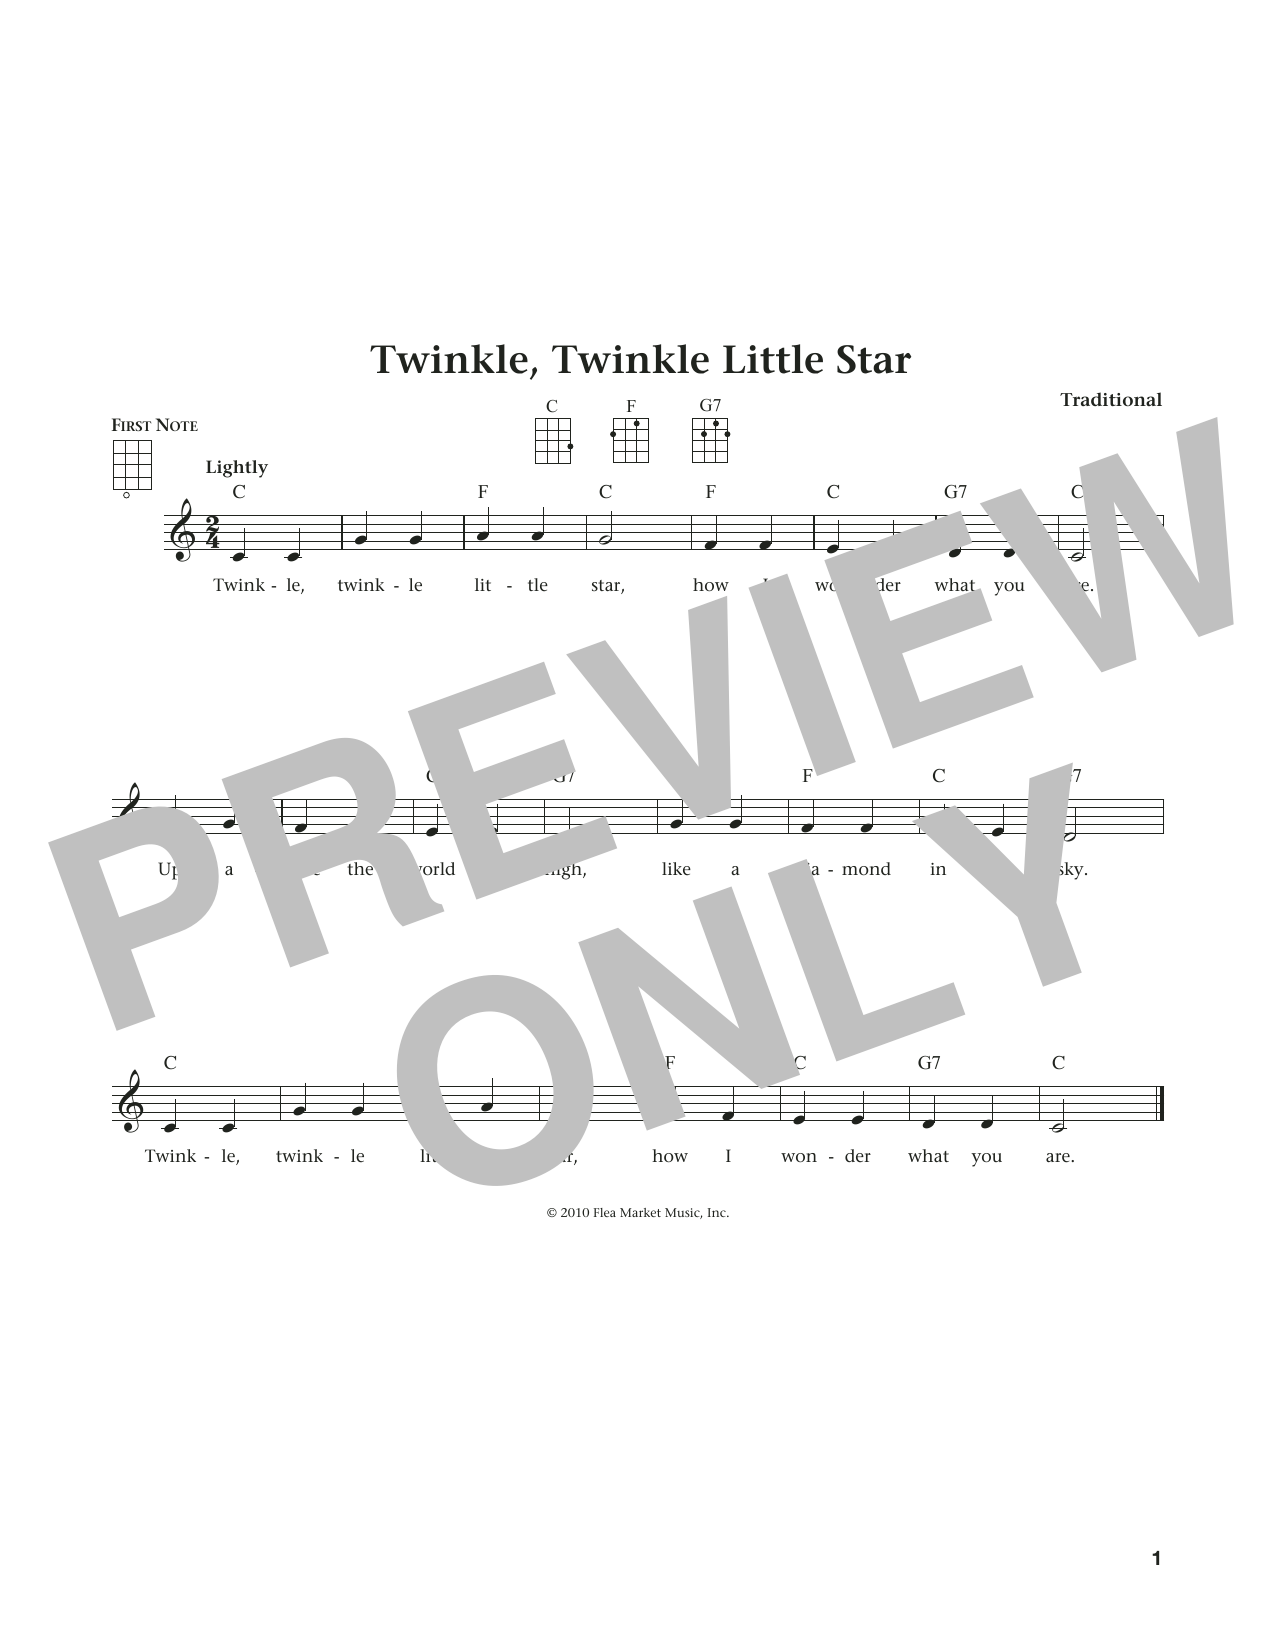 Download Traditional Twinkle, Twinkle Little Star (from The Sheet Music